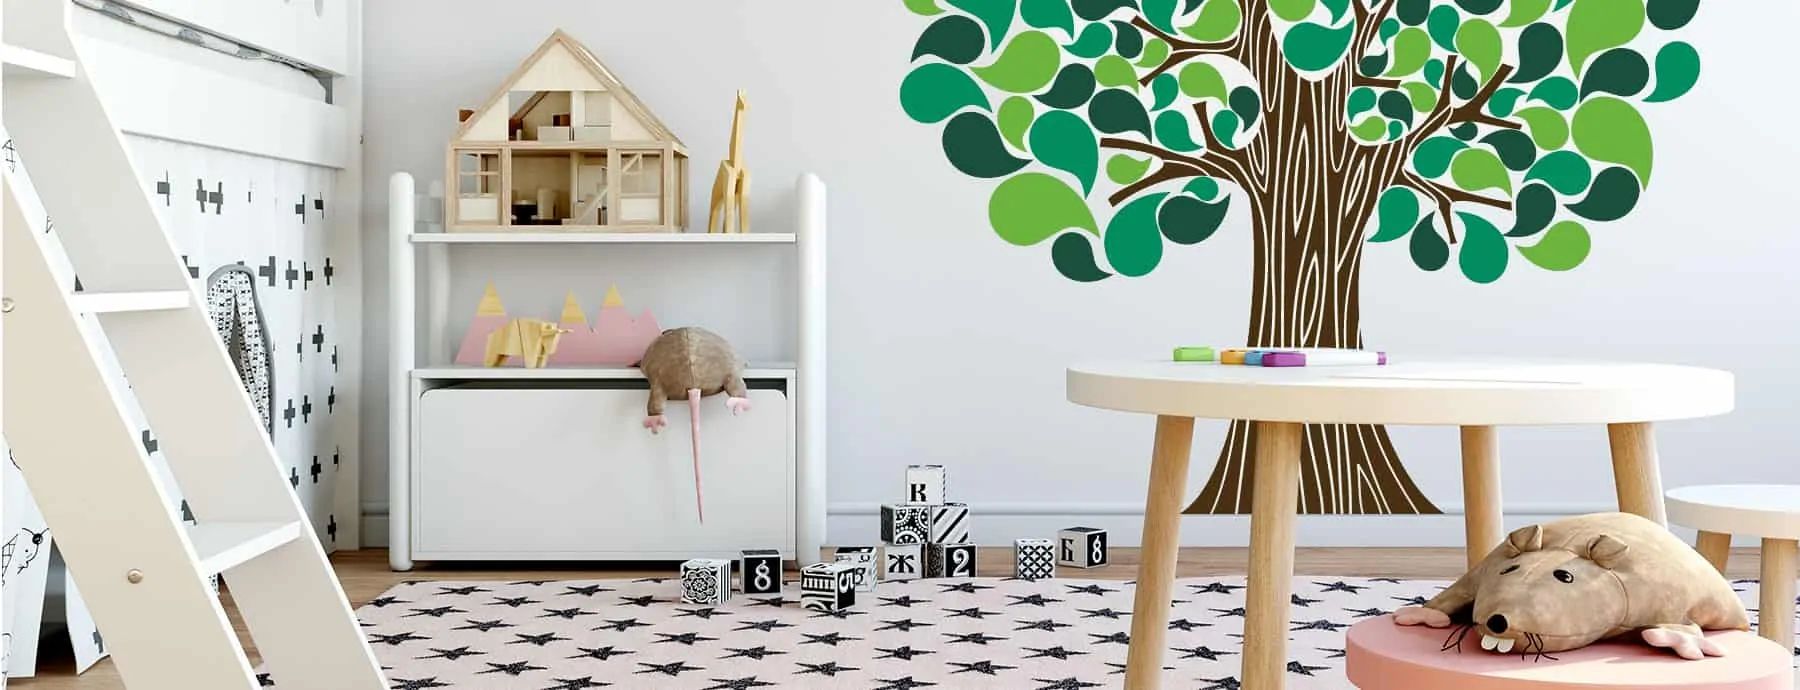 Family Tree Wall Decals